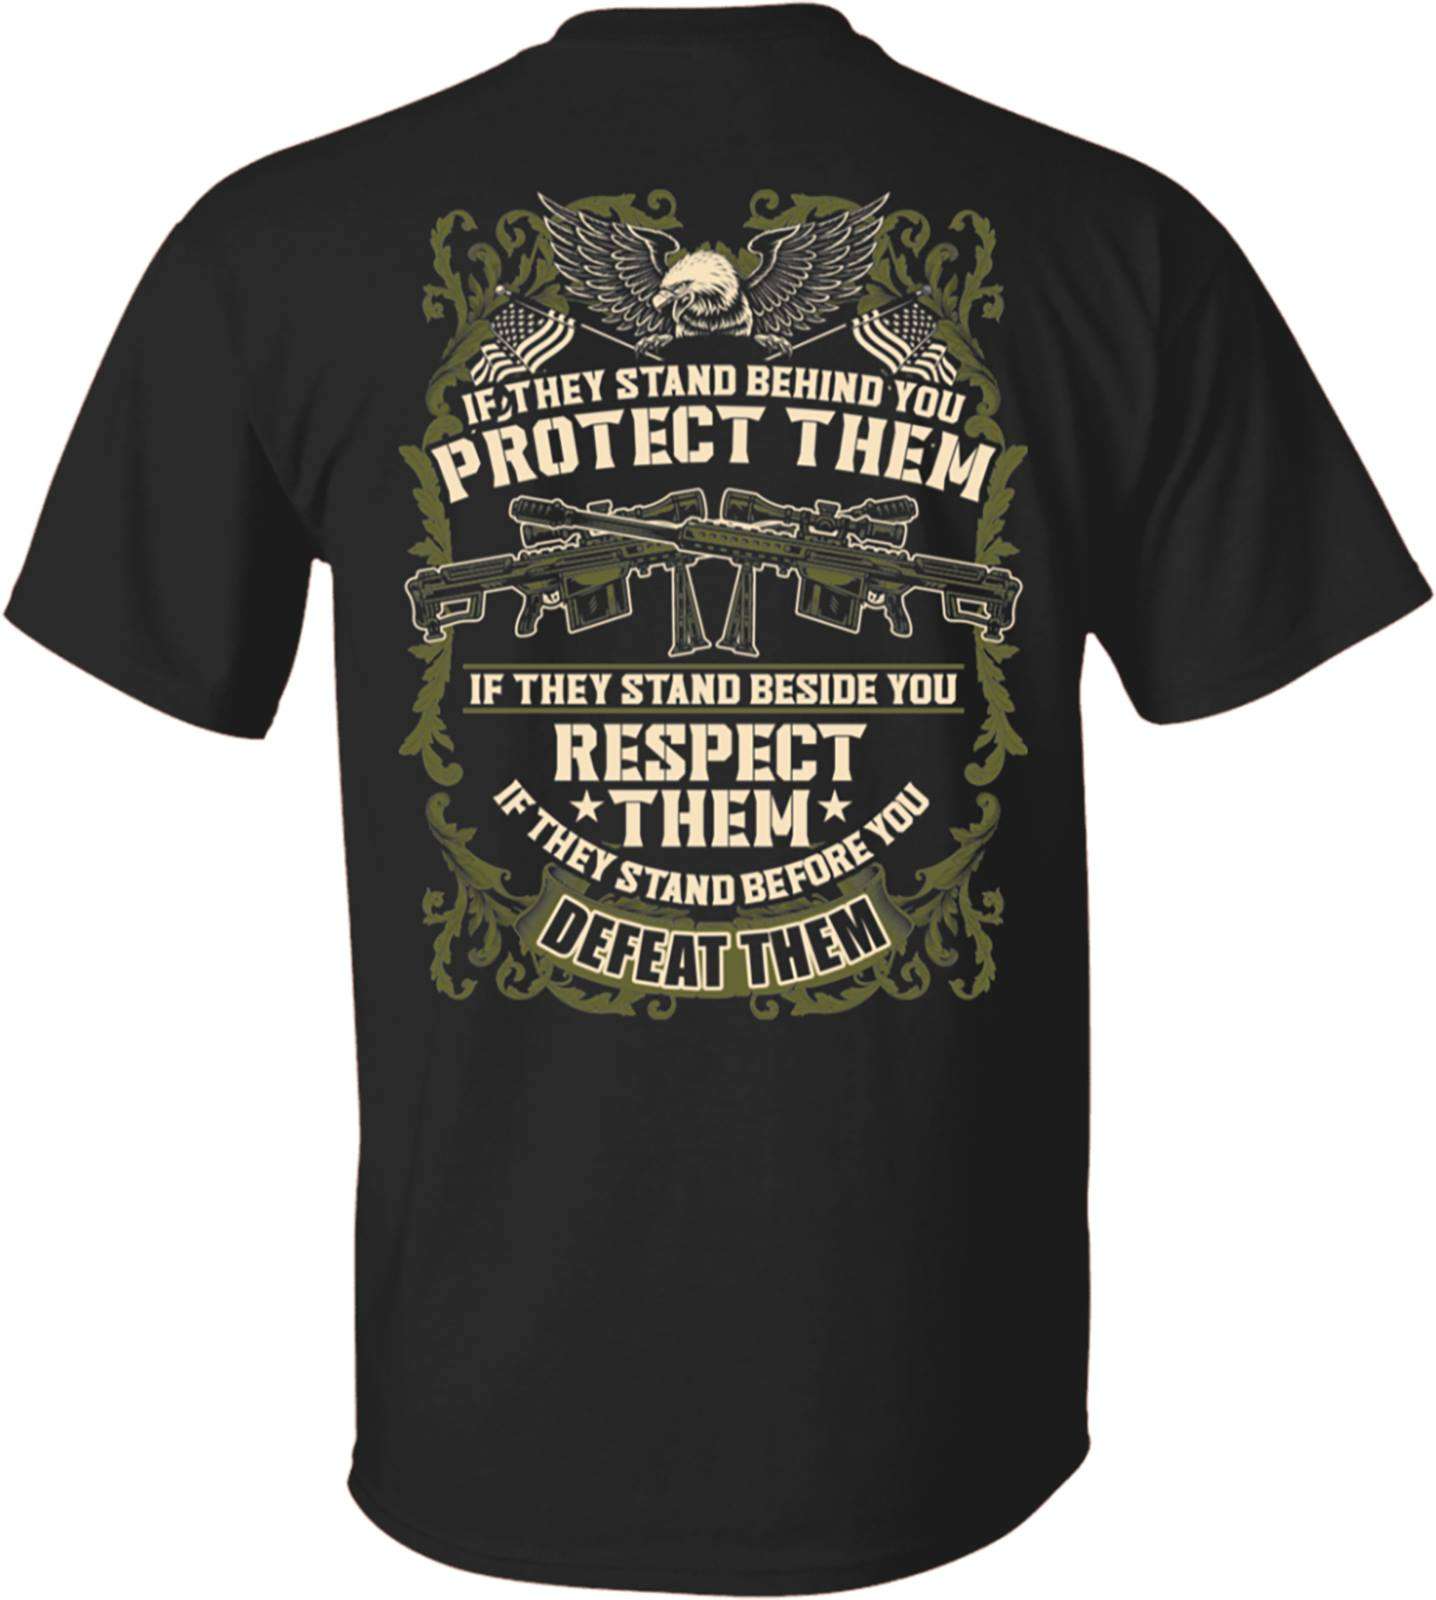 Eagle Gun - If they stand behind you protect them if they stand beside you respect them